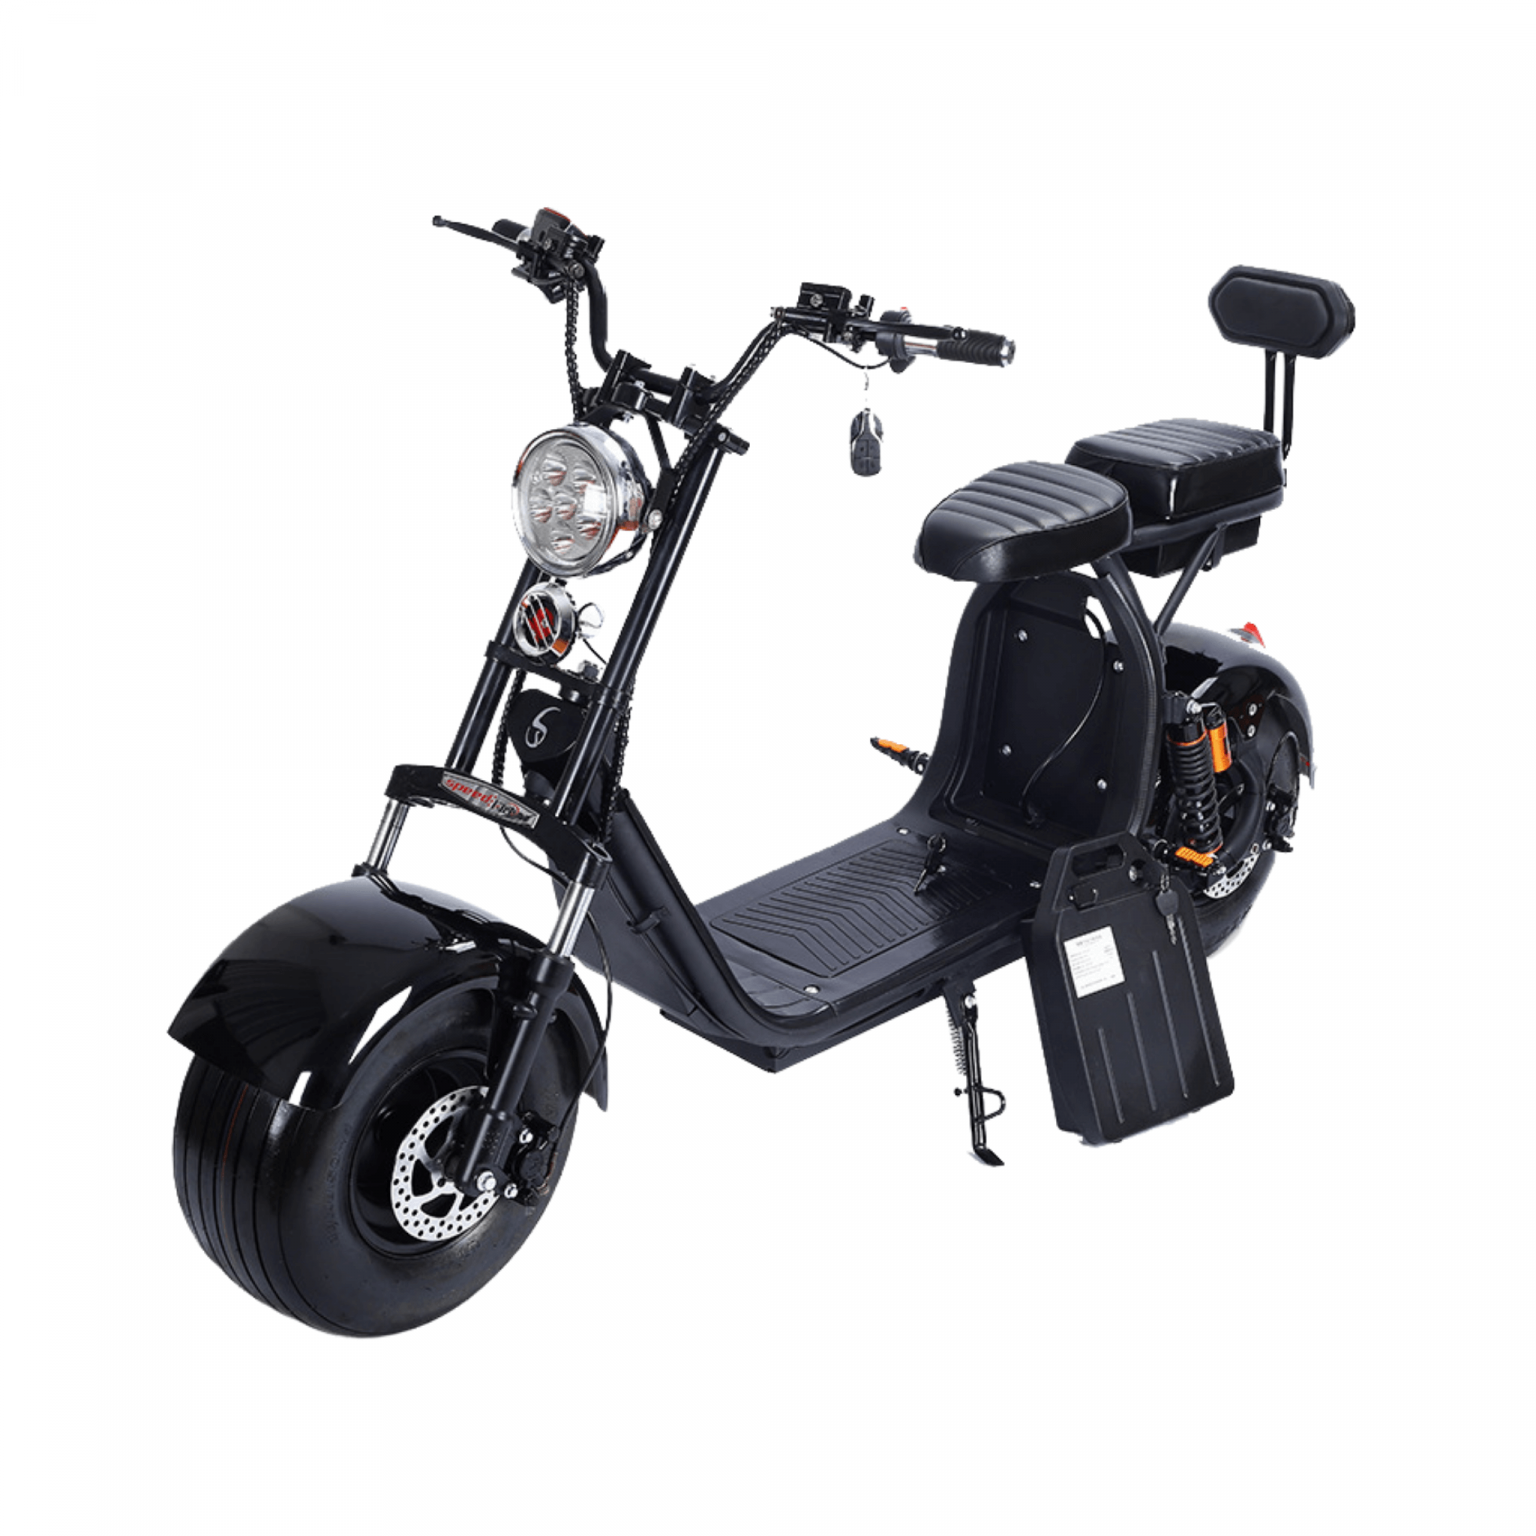 Plus Scooters (2000W) – City Cruiser